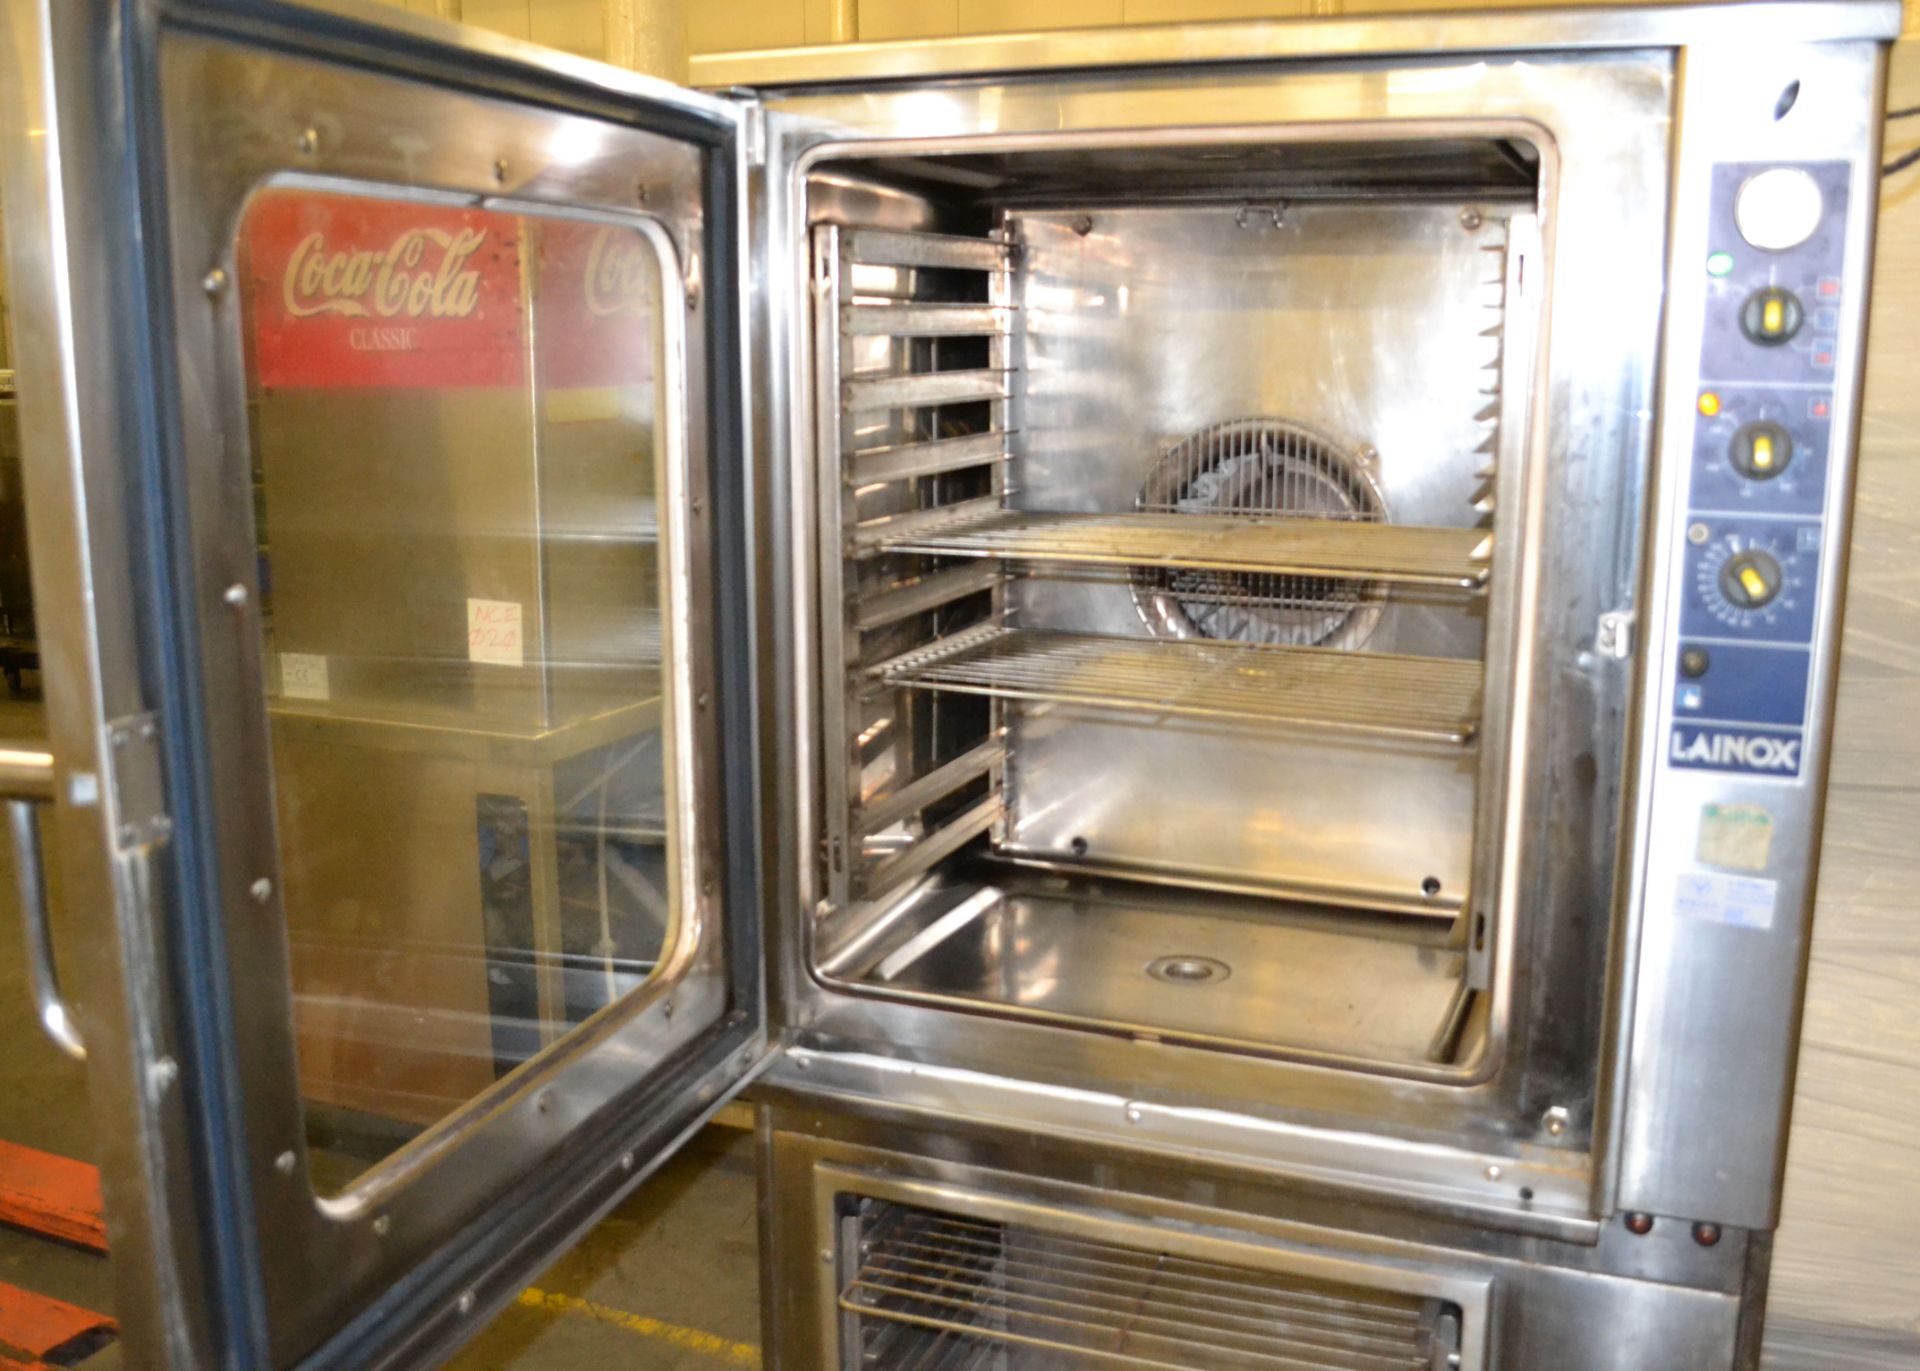 1 x Lainox MG110M LX Type Combination Oven with Pan Capacity - Ref:NCE032 - CL007 - Location: Bolton - Image 4 of 15